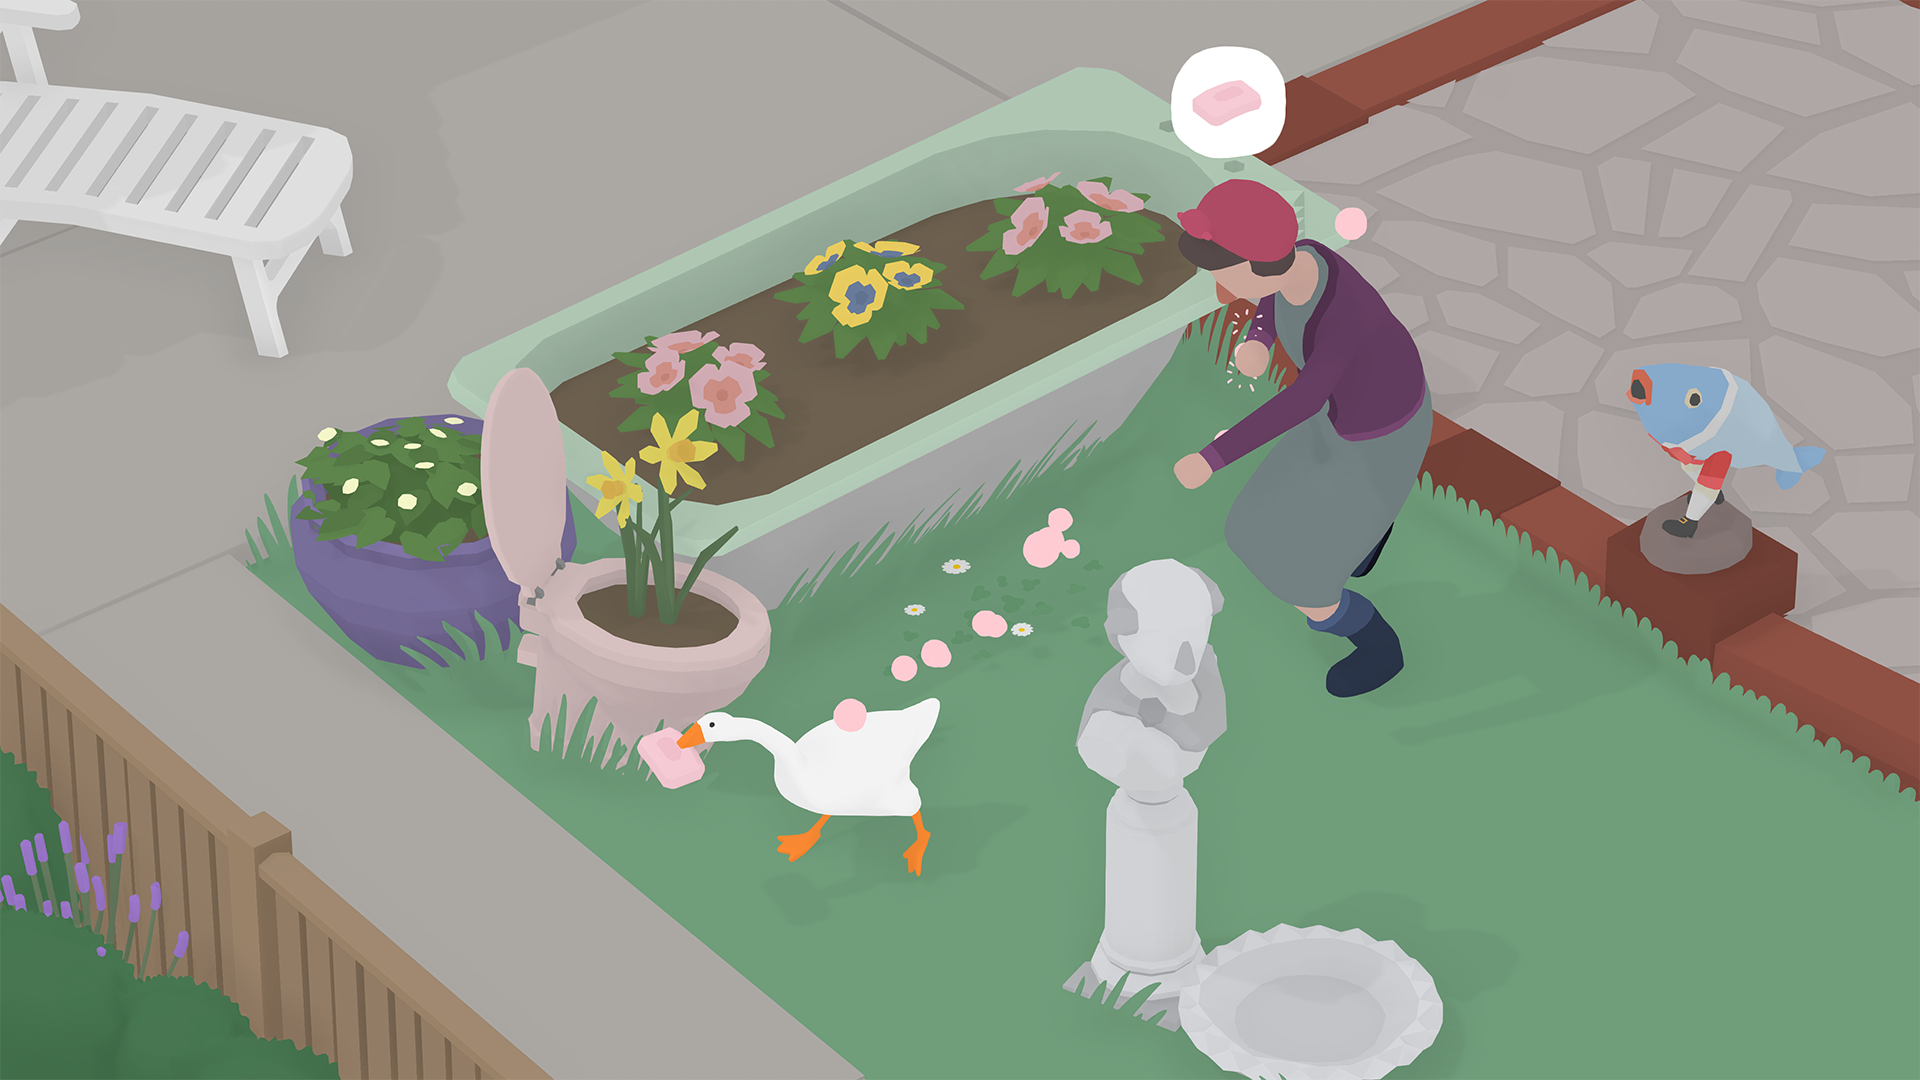 Come to GDC and see how Untitled Goose Game's levels were scouted